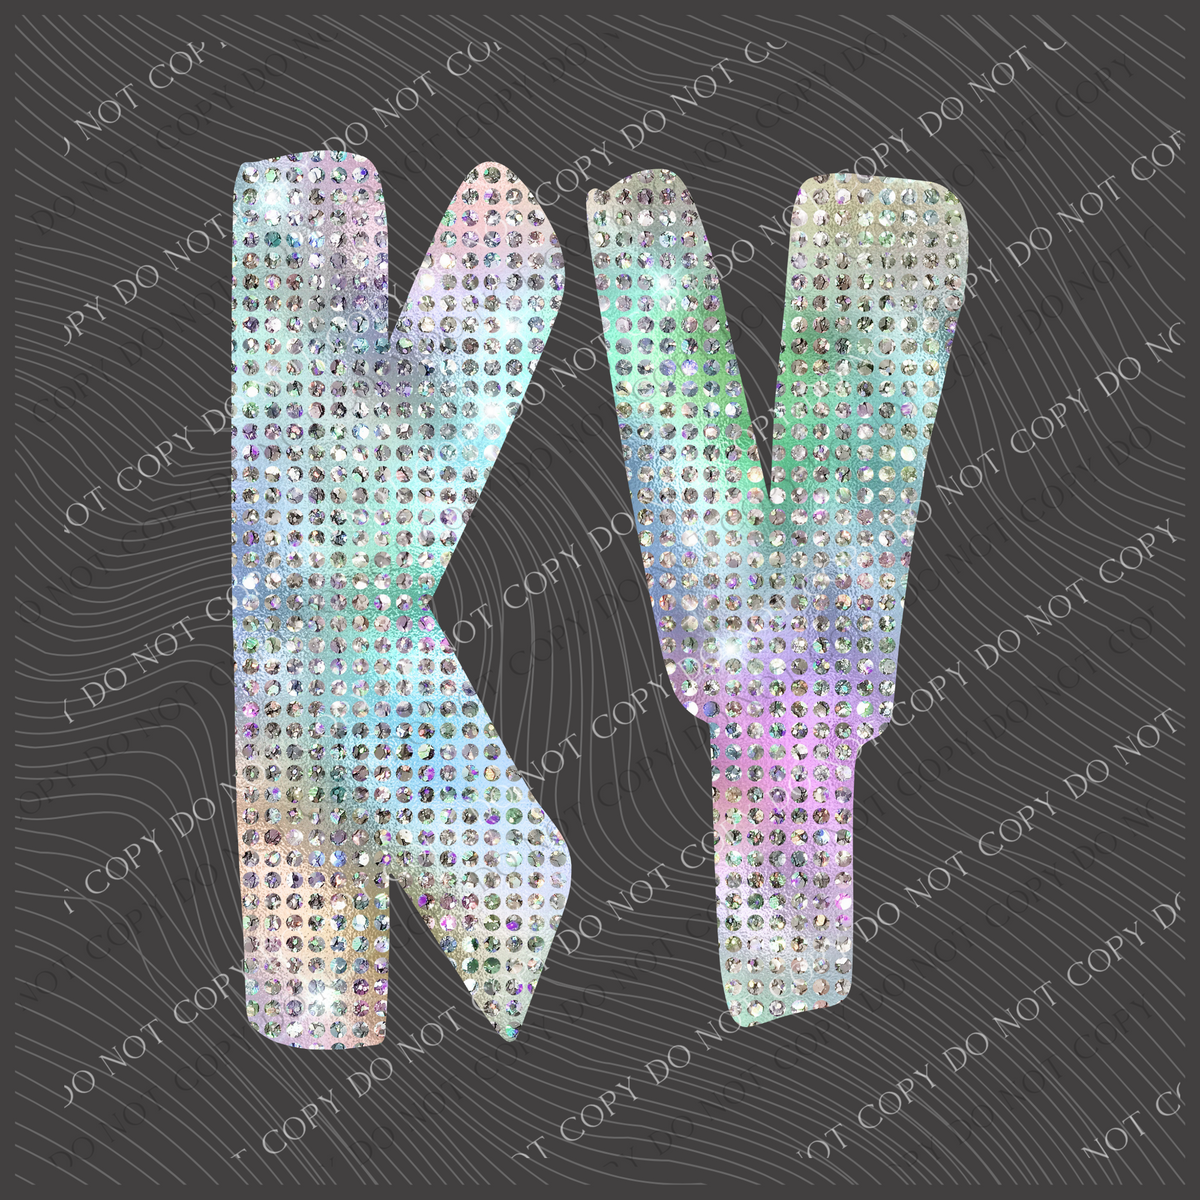 KY Kentucky Halographic Bling Digital Design, PNG